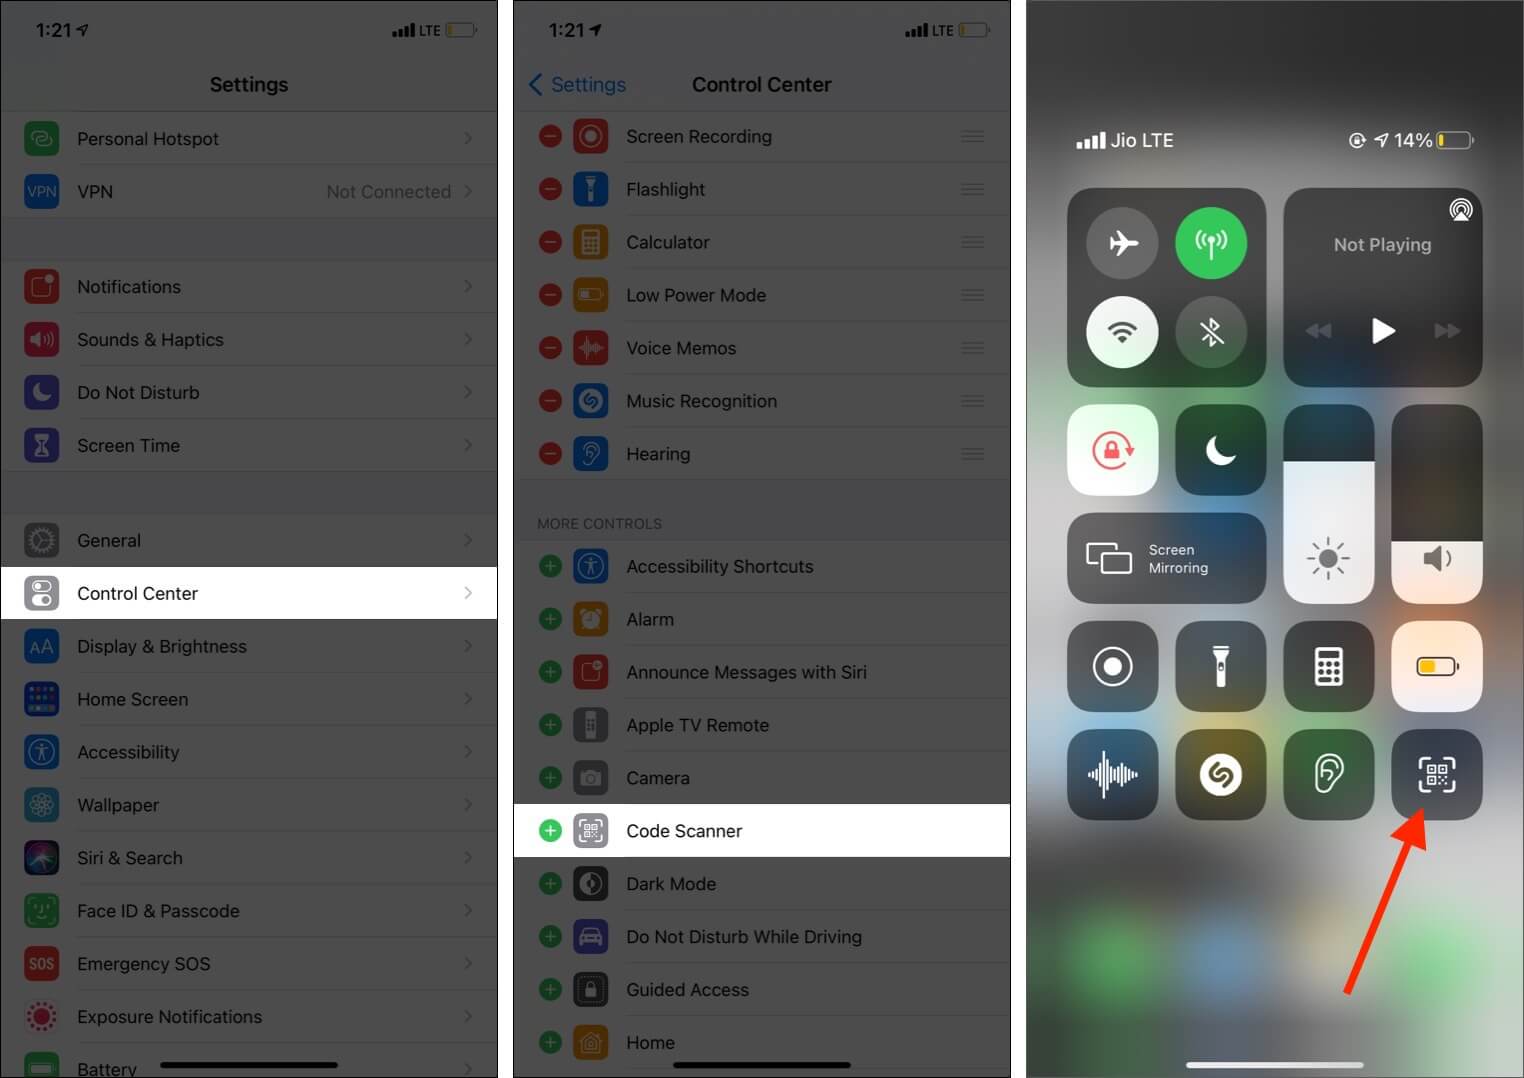 Add a QR code scanner to Control Center